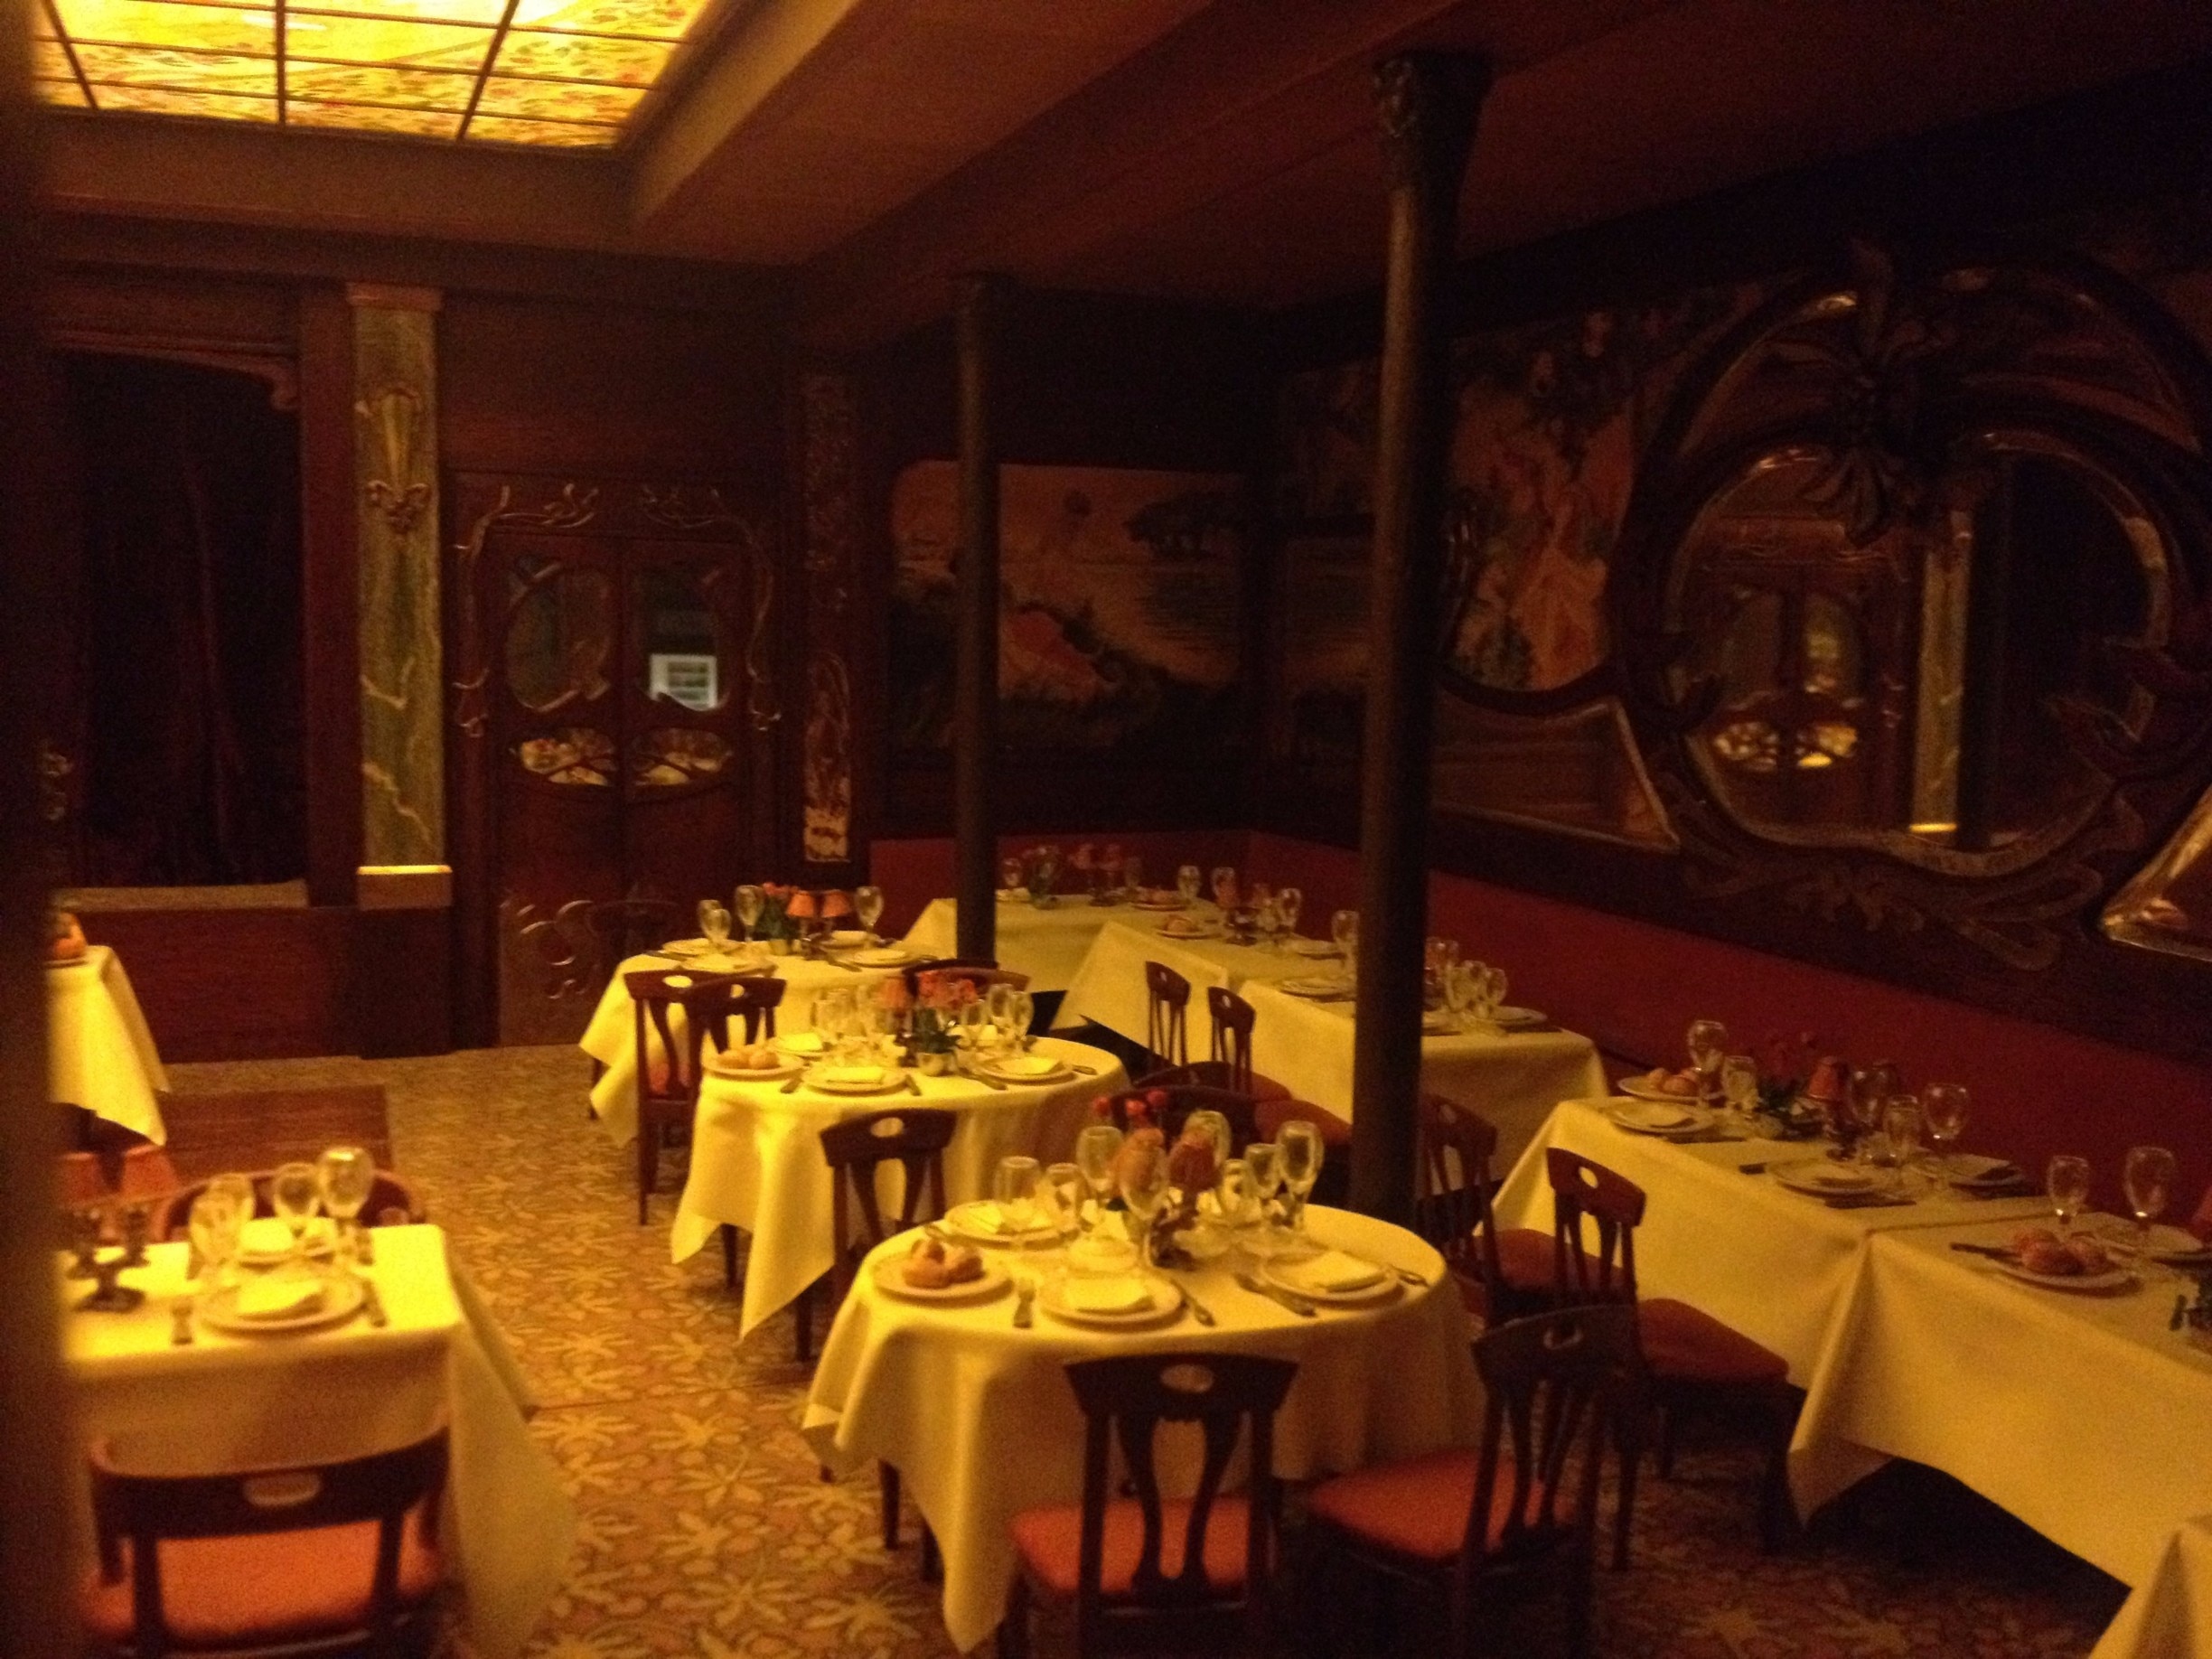 The museum houses an excellent collection of miniatures. The photo shows 'Maxim's' restaurant in Paris. It is definitely worth a visit and it is a museum that kids will love as well.